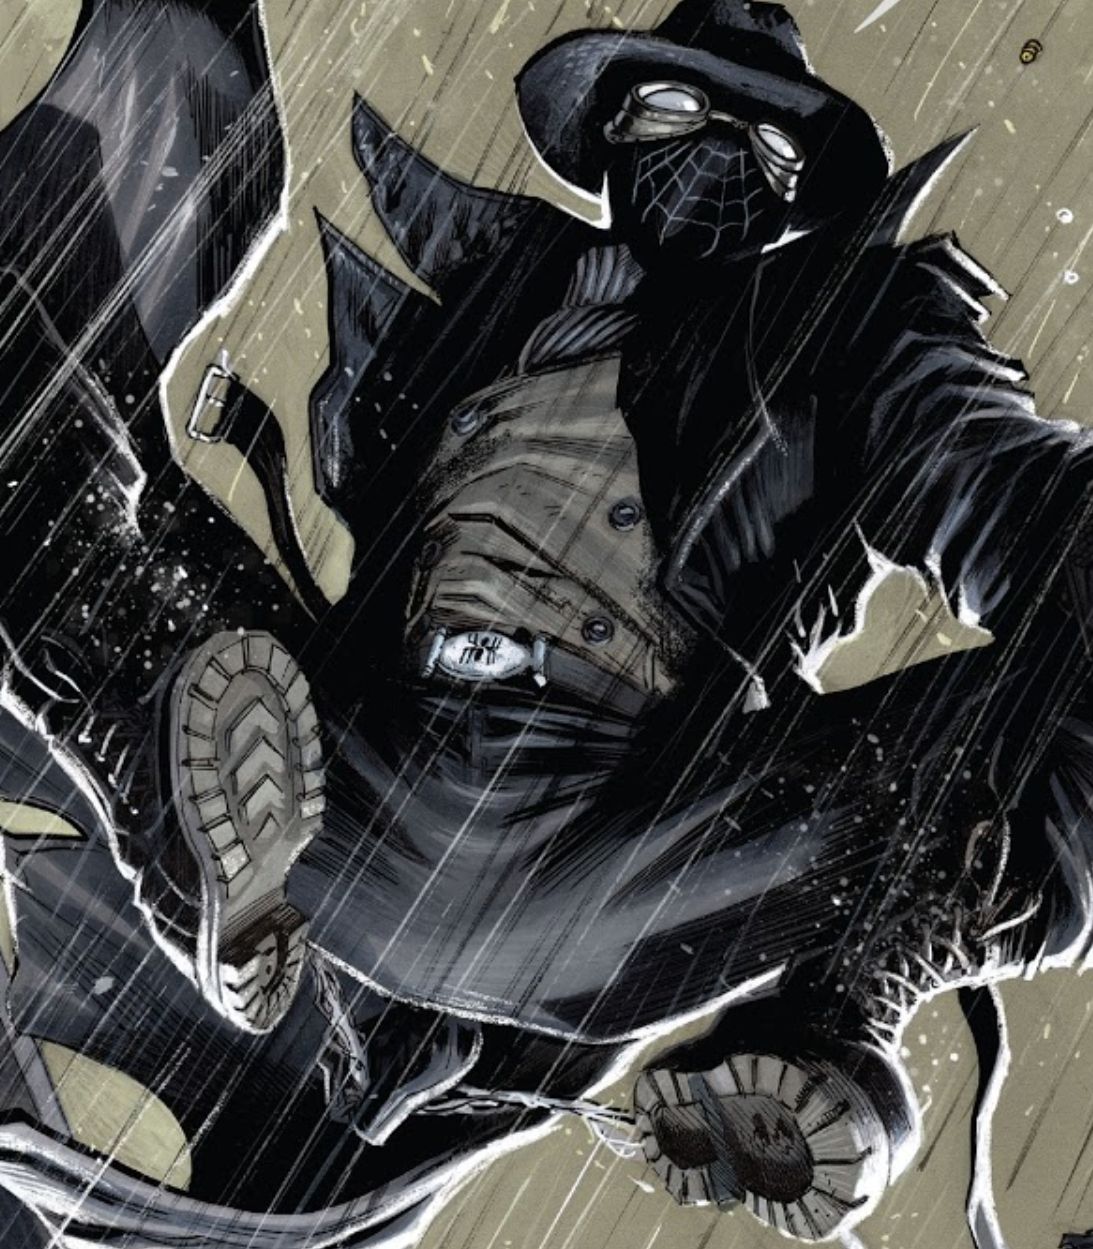 Spider-Man Noir jumps down from above.